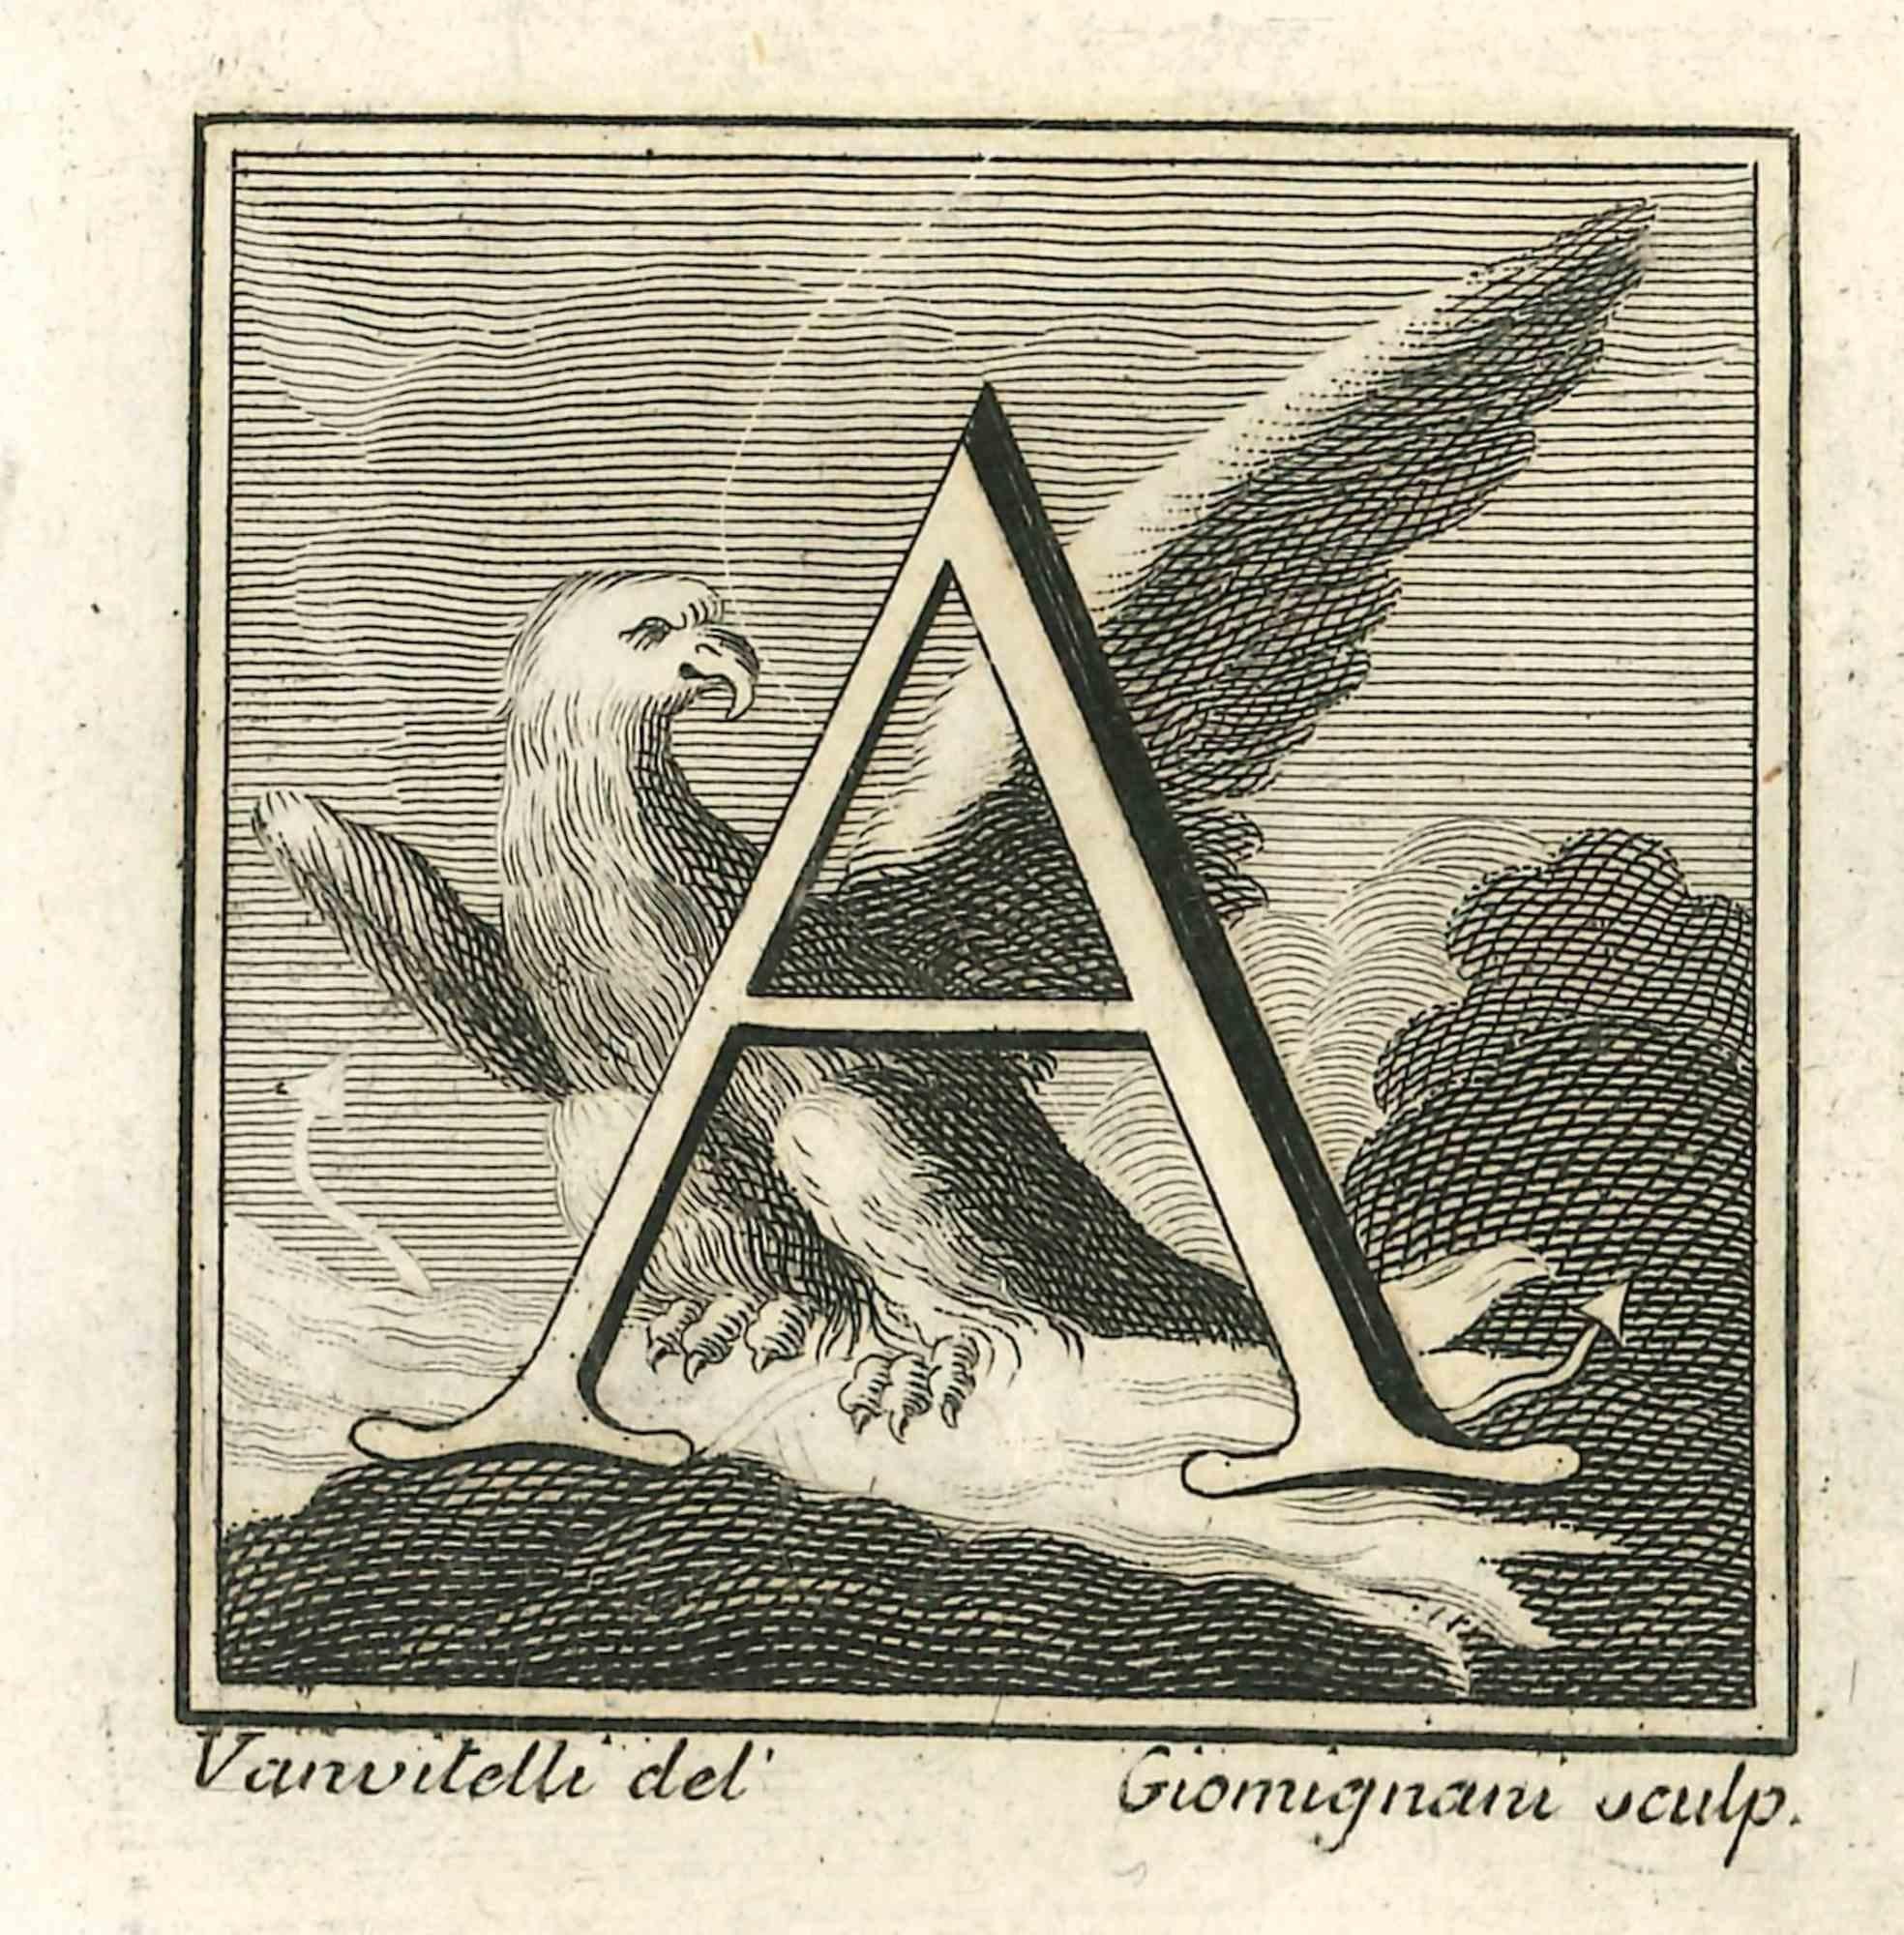 Letter A is an Etching realized by Luigi Vanvitelli in 18th century.

The etching belongs to the print suite “Antiquities of Herculaneum Exposed” (original title: “Le Antichità di Ercolano Esposte”), an eight-volume volume of engravings of the finds